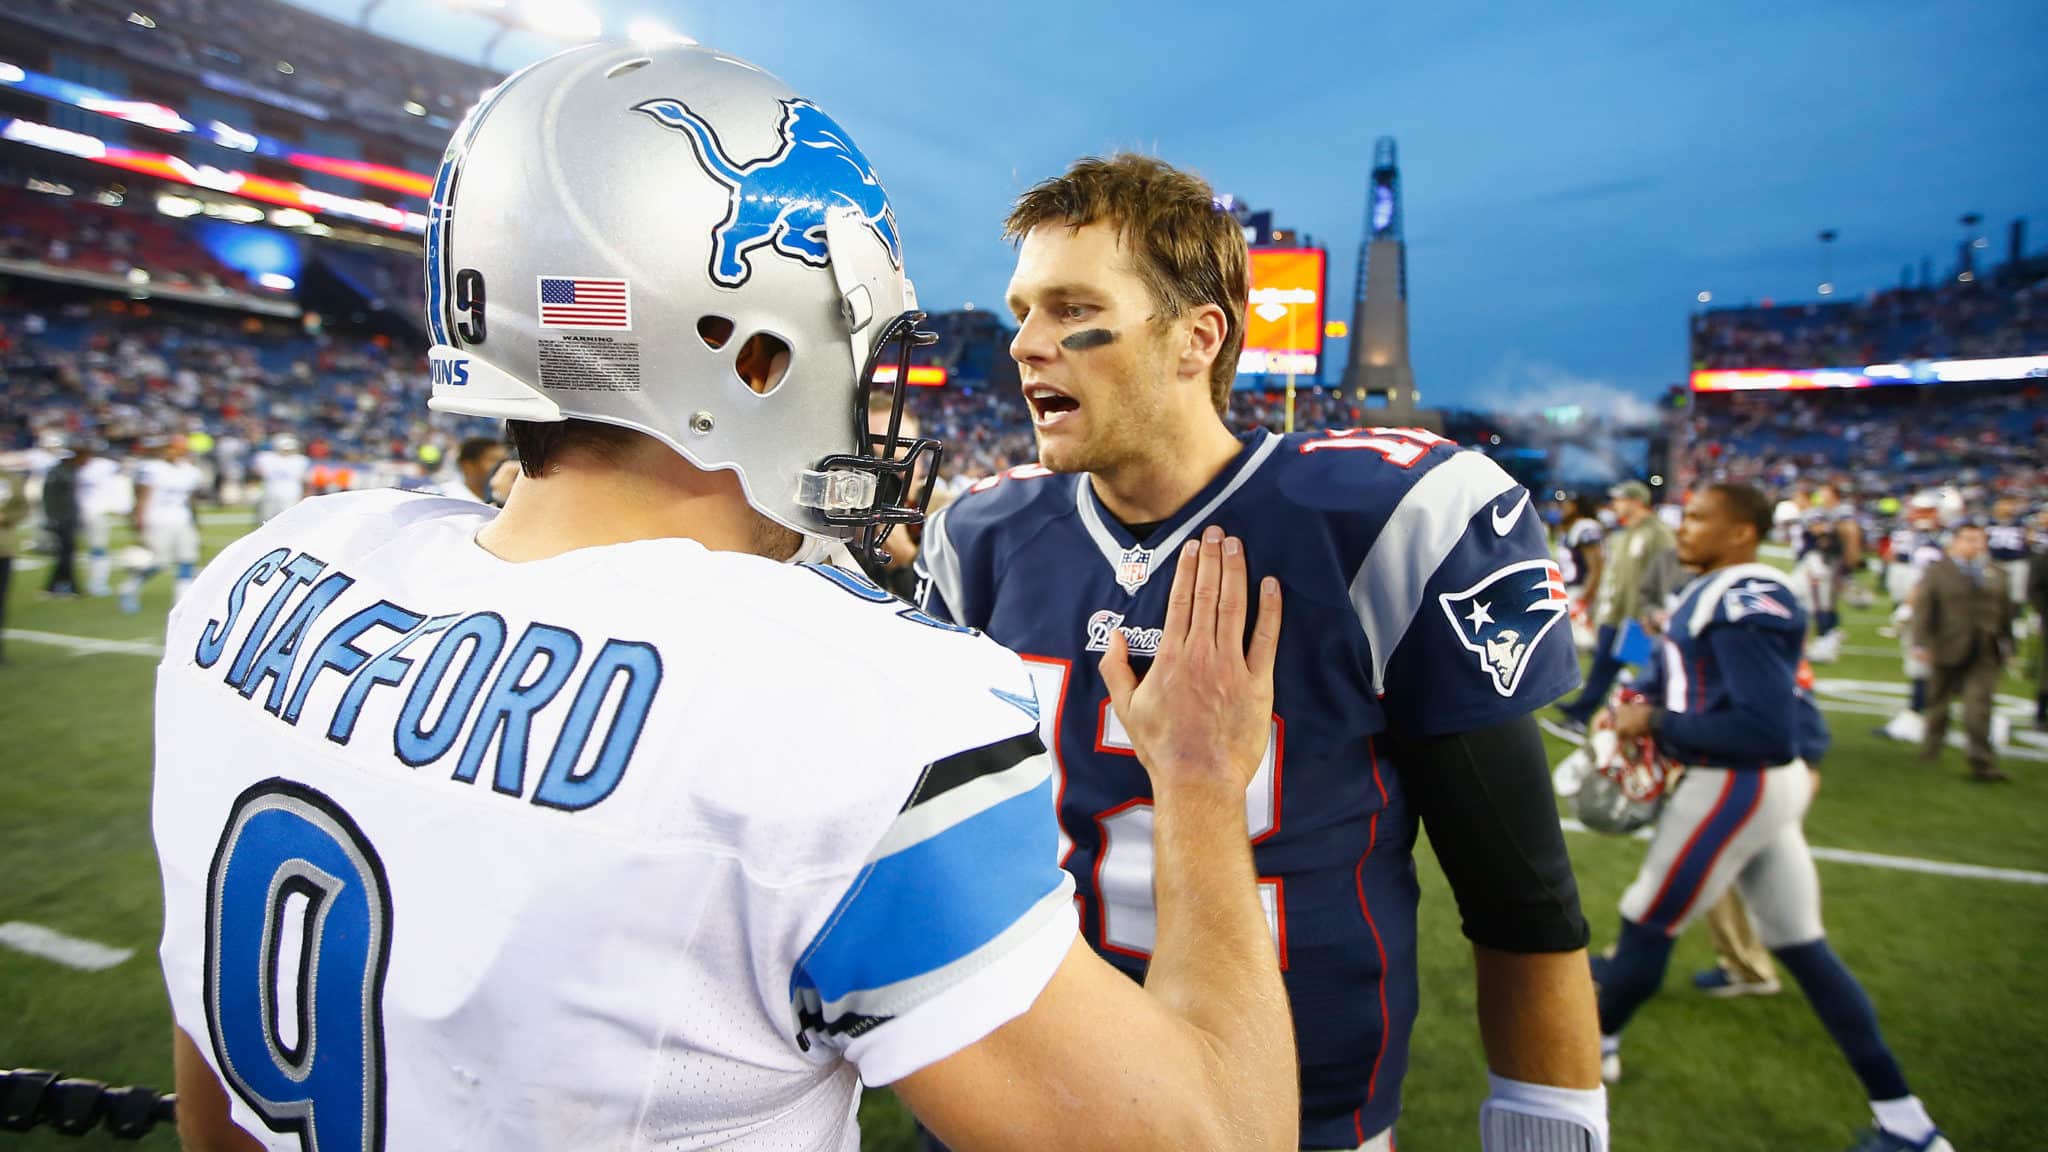 FOXBORO, MA - NOVEMBER 23: Tom Brady #12 of the New England Patriots shakes hands with Matthew Stafford #9 of the Detroit Lions after a game at Gillette Stadium on November 23, 2014 in Foxboro, Massachusetts.